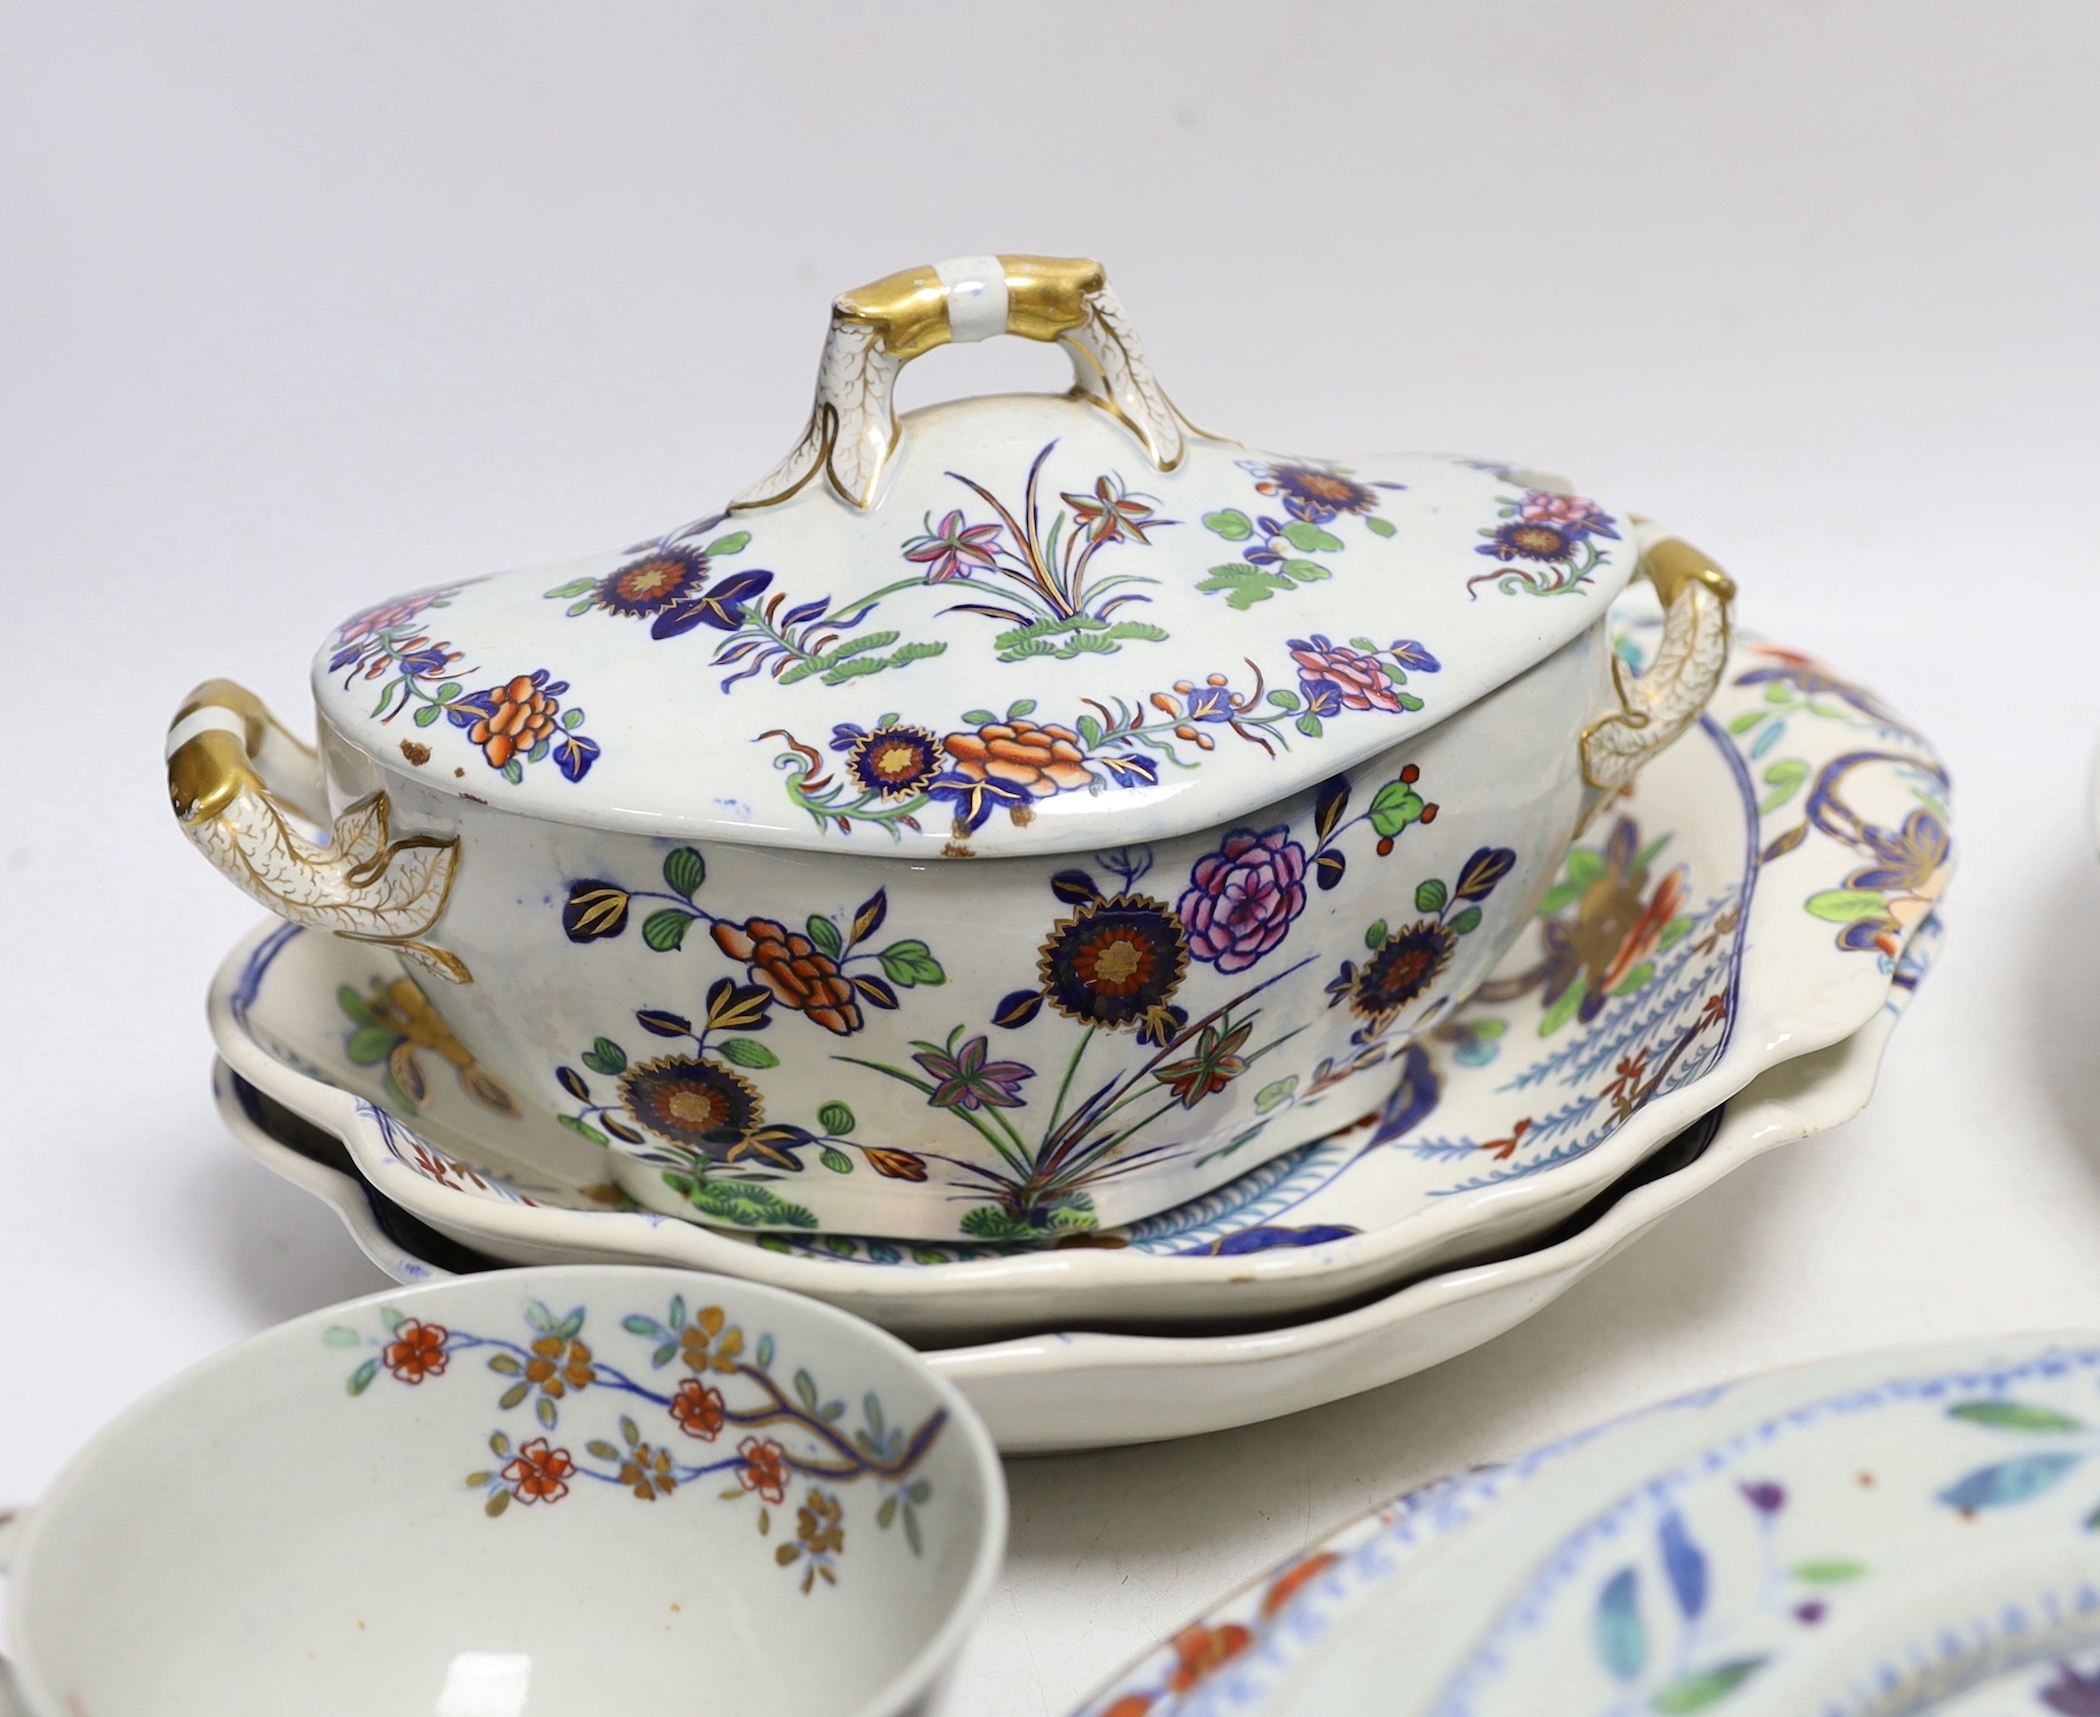 A collection of Spode Ironstone and pottery blue tea and dinnerware, including a pair of oval boat shaped sauce tureens and covers and a pair of shell shaped dessert dishes